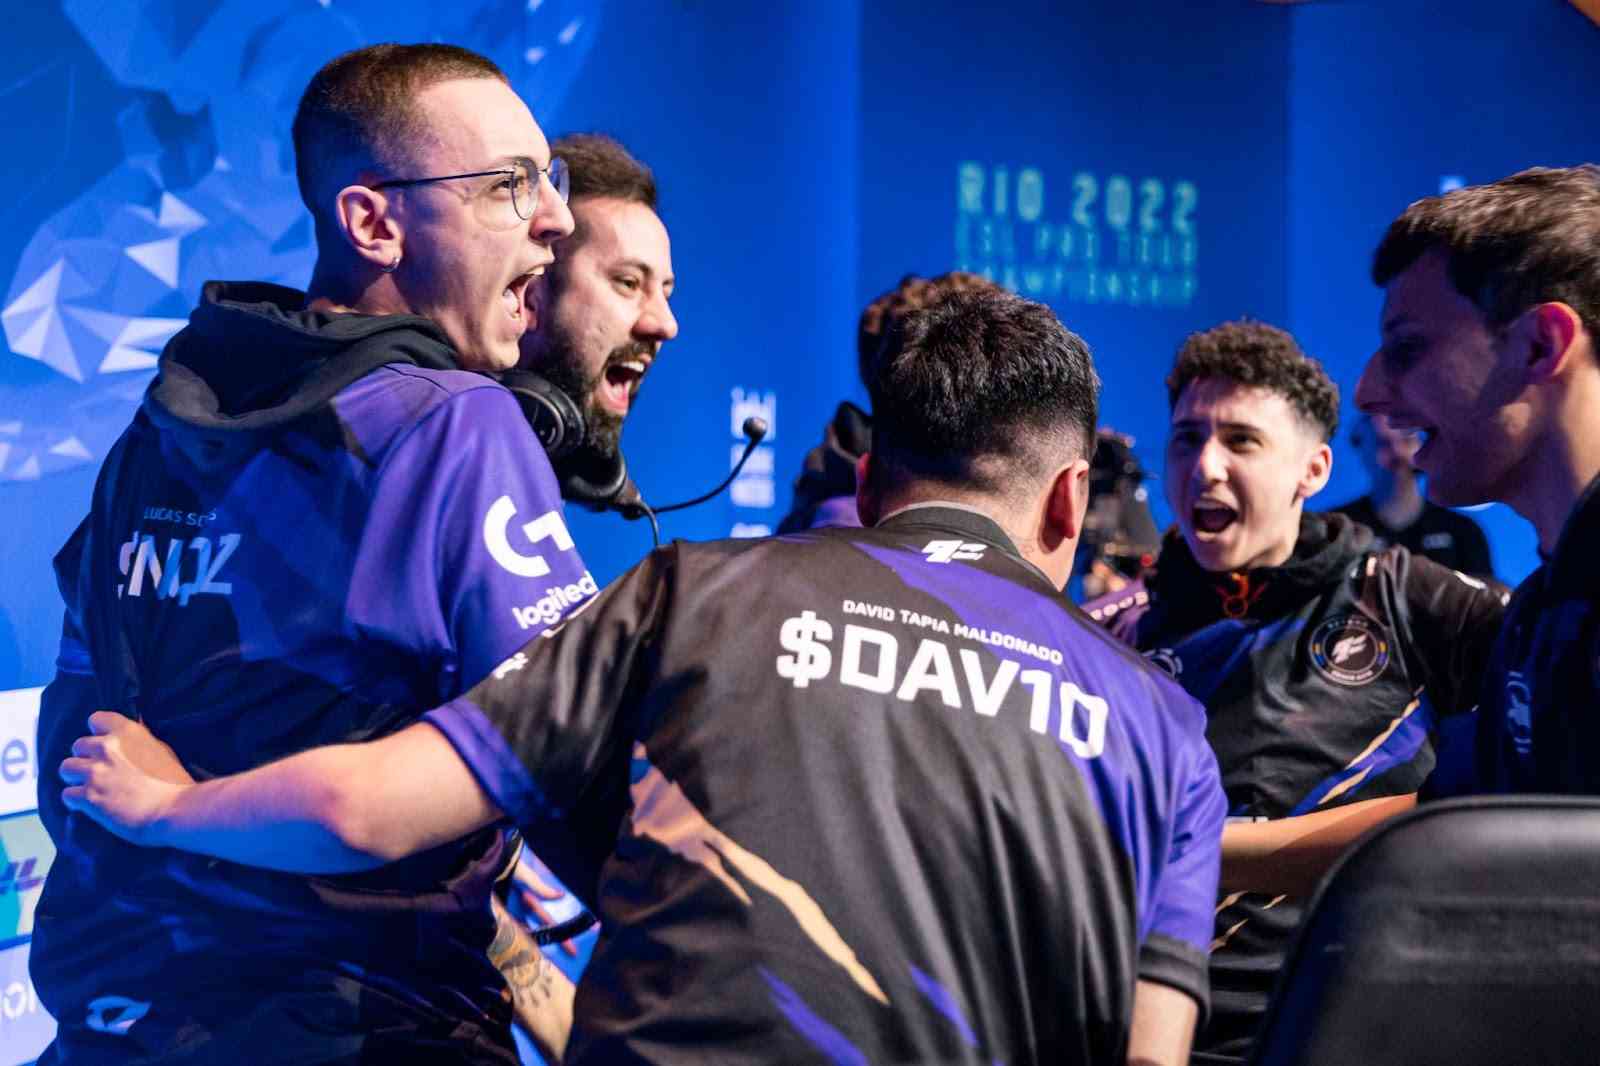 The roster for Furia celebrate after a win at Rio